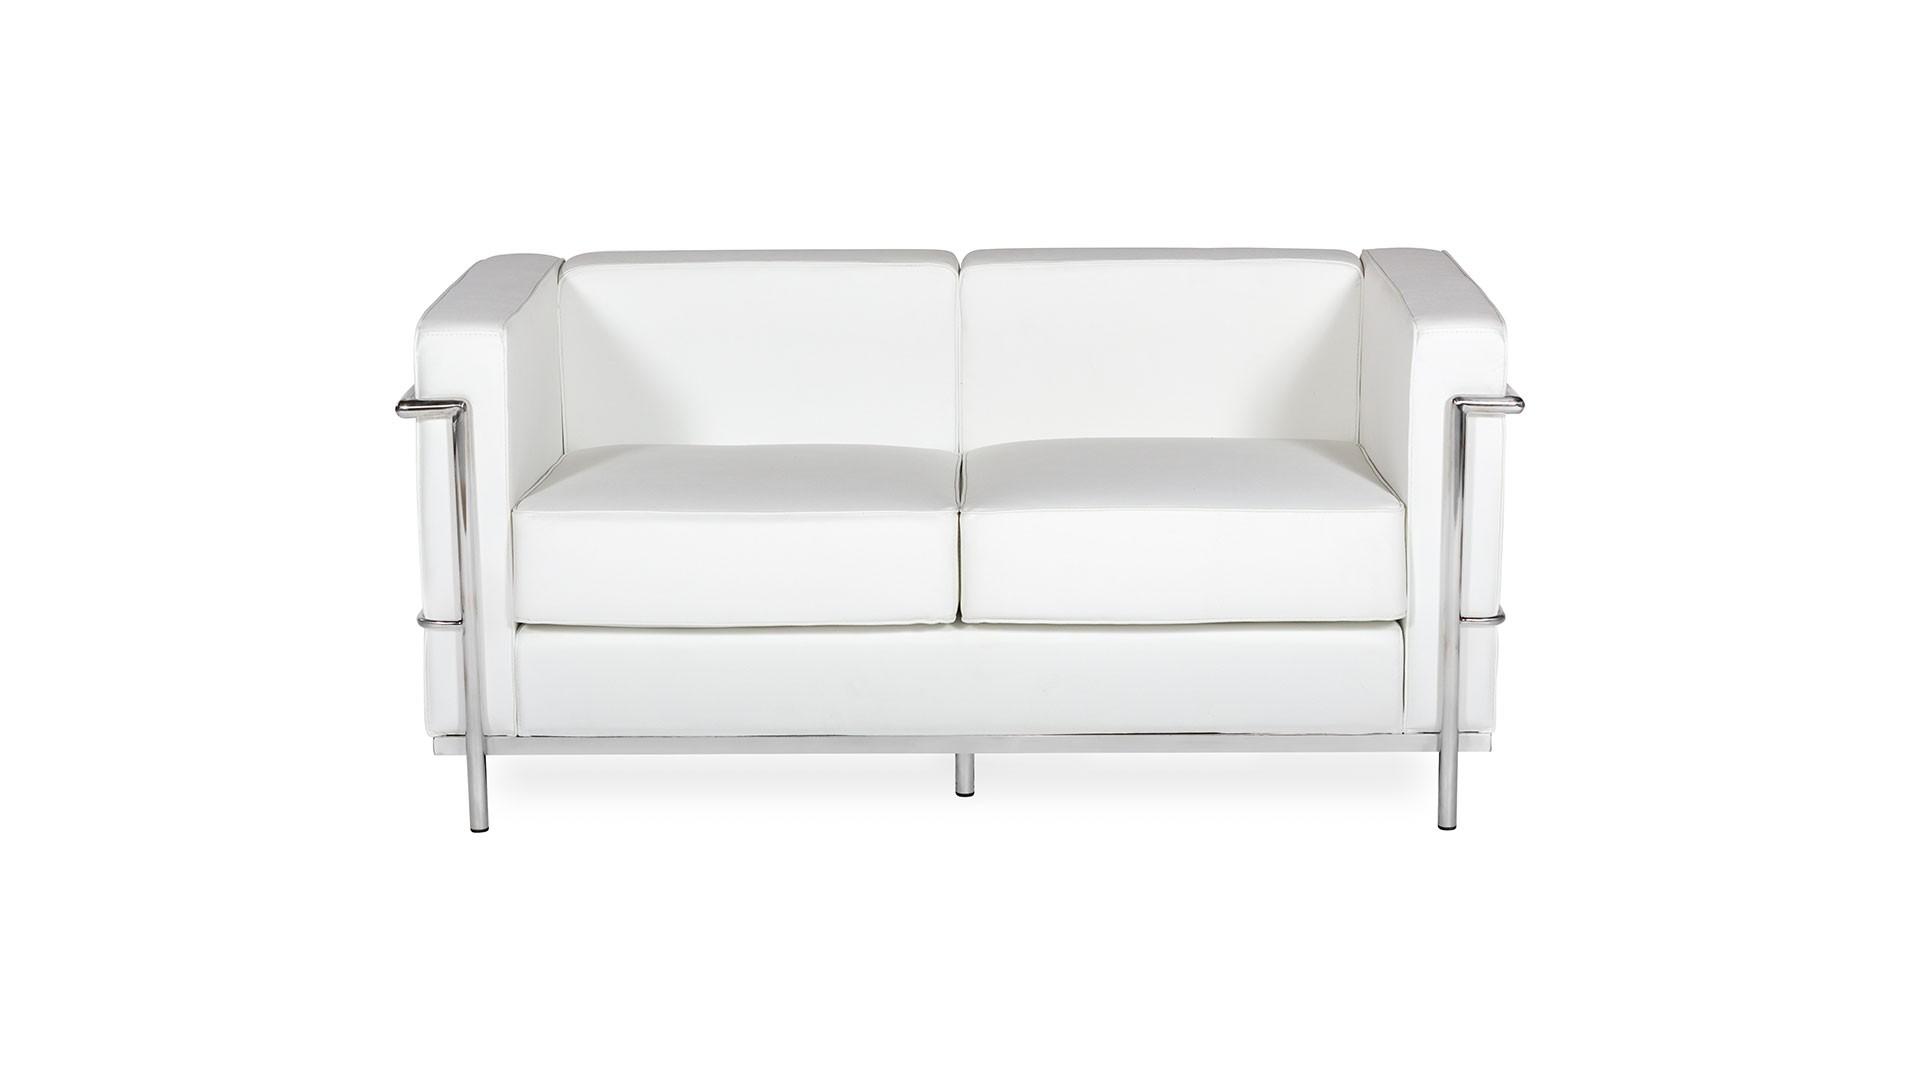 At Home USA Nube Loveseat